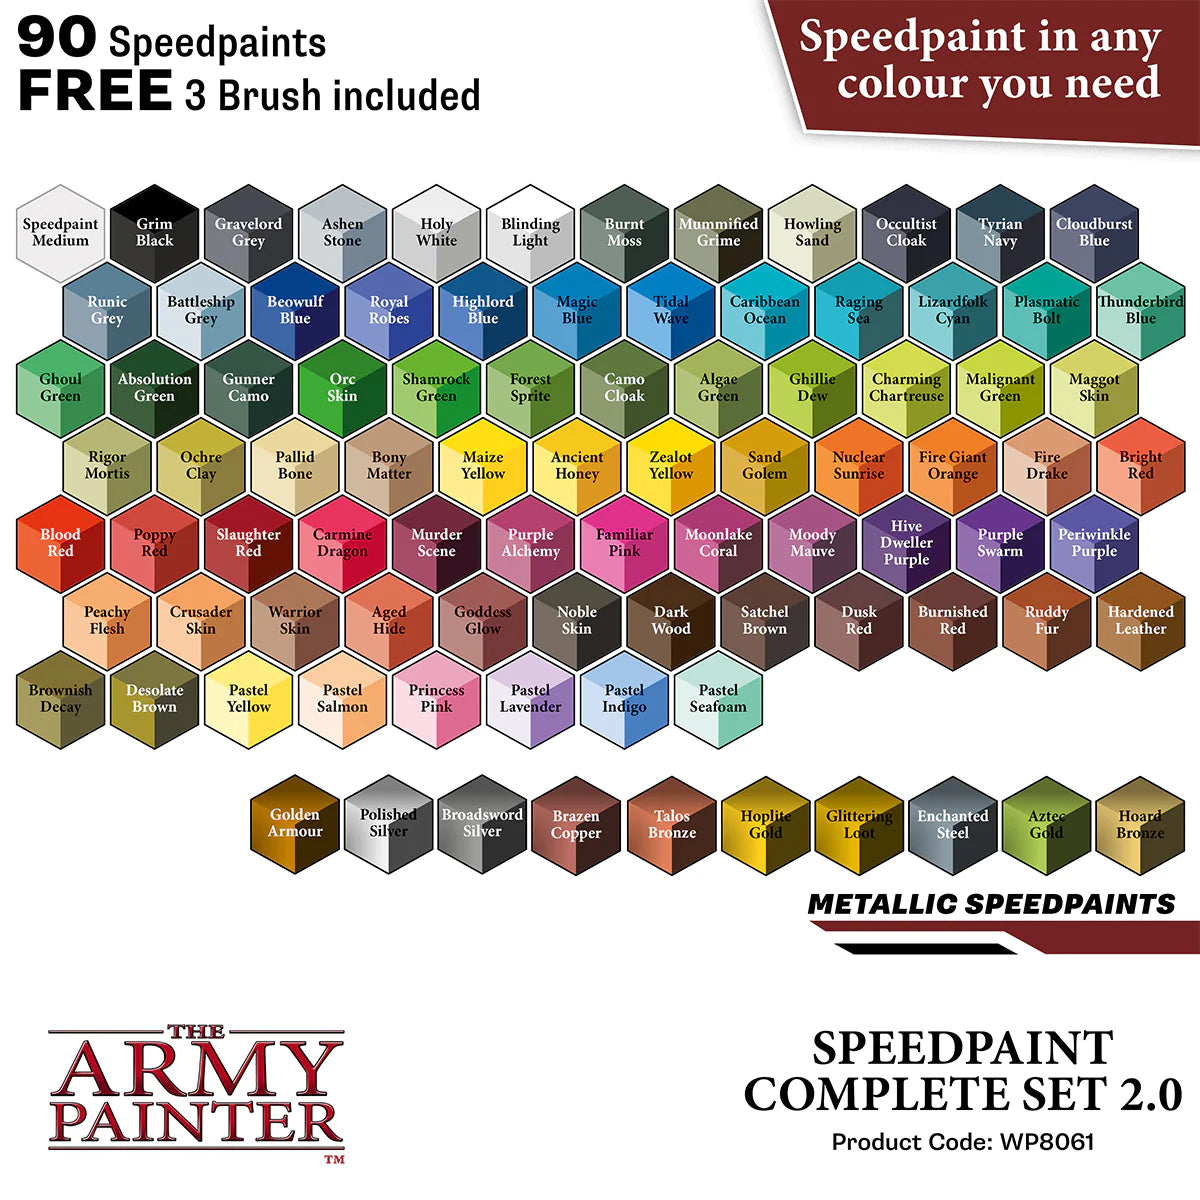 New: The Army Painter Warpaints - 2017 Sets now available